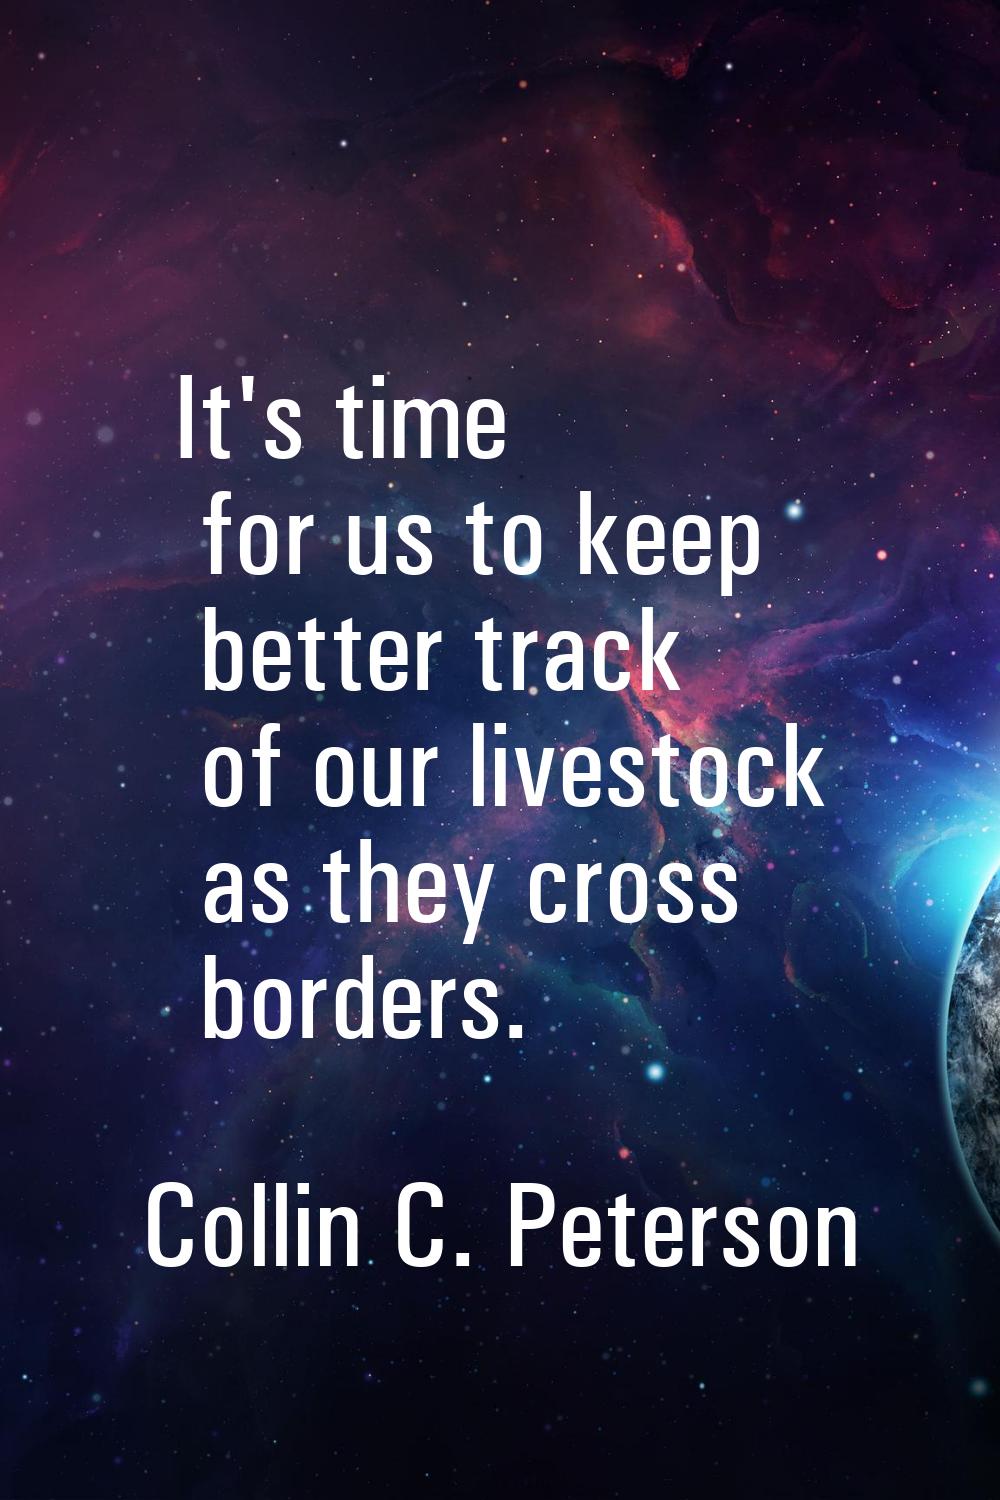 It's time for us to keep better track of our livestock as they cross borders.